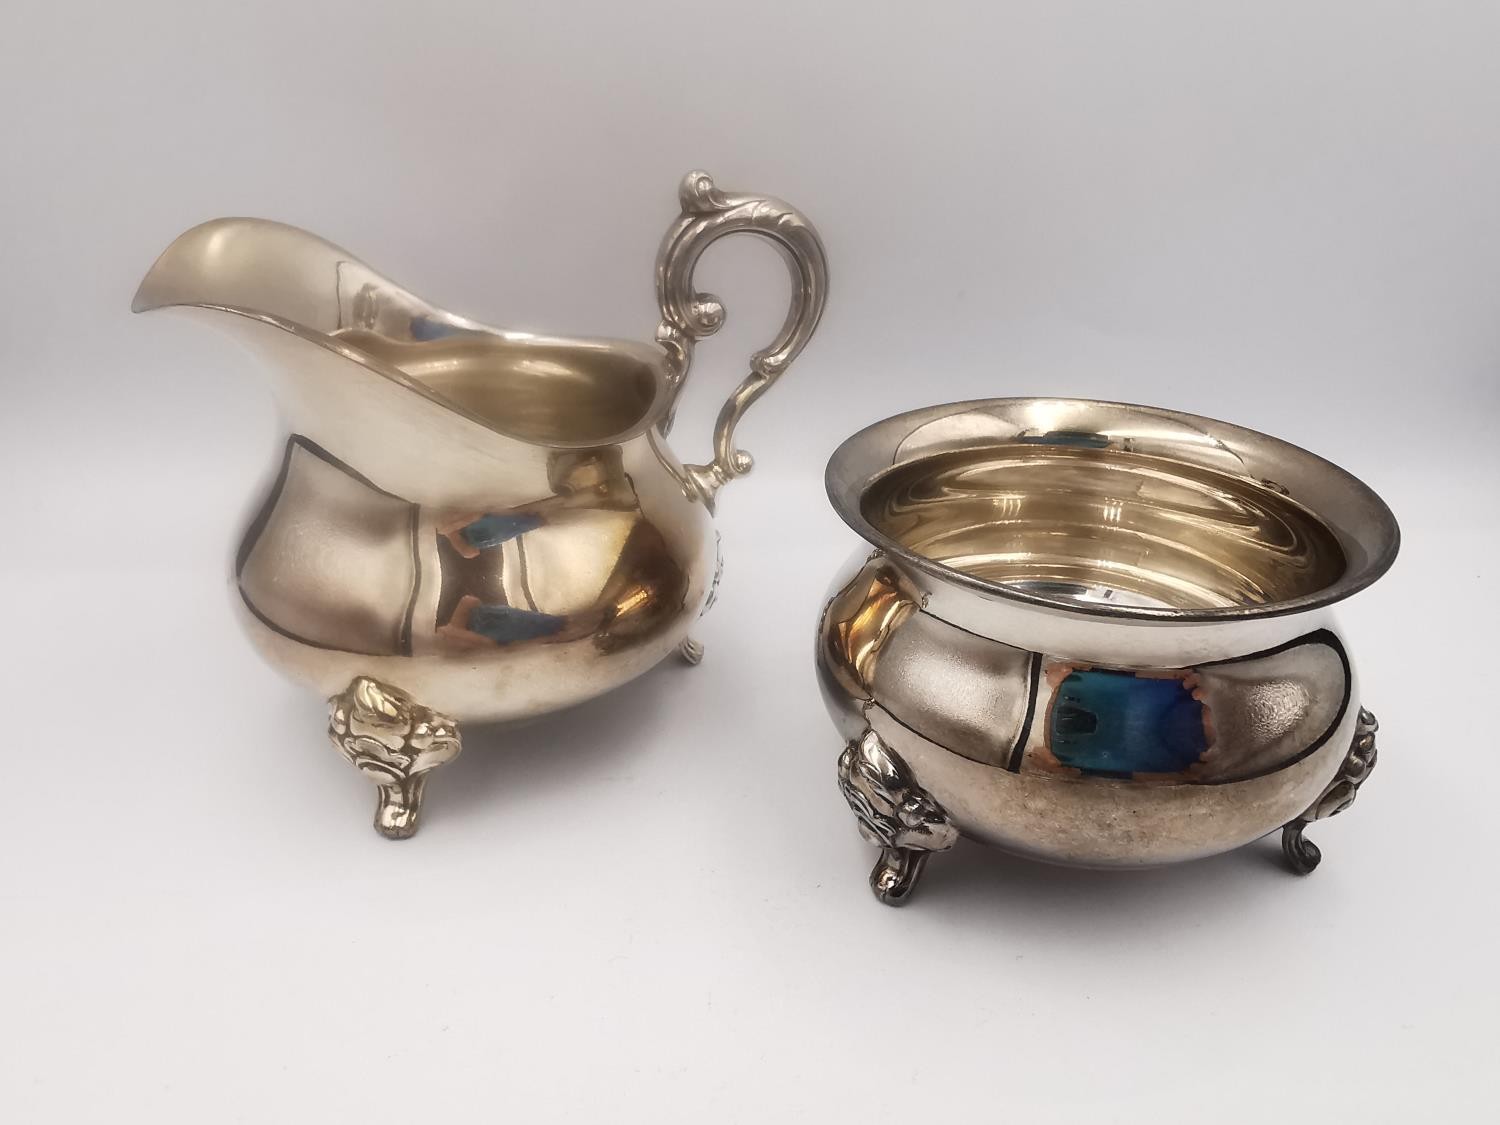 A matching German silver milk jug and sugar bowl, along with a small German silver vase and an - Image 2 of 8